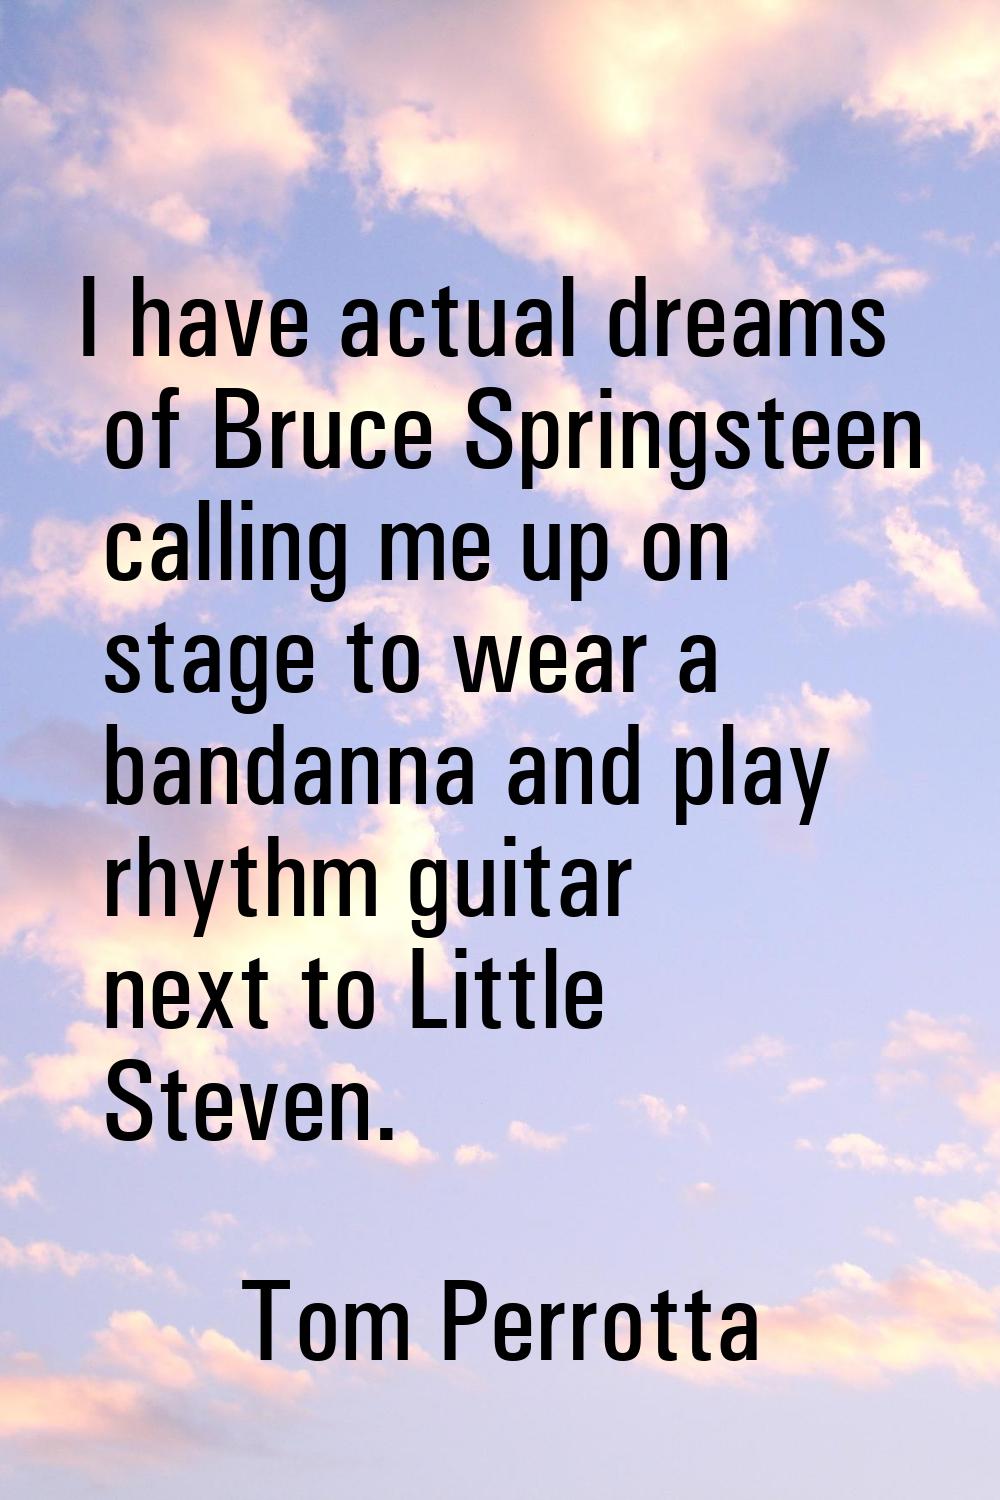 I have actual dreams of Bruce Springsteen calling me up on stage to wear a bandanna and play rhythm